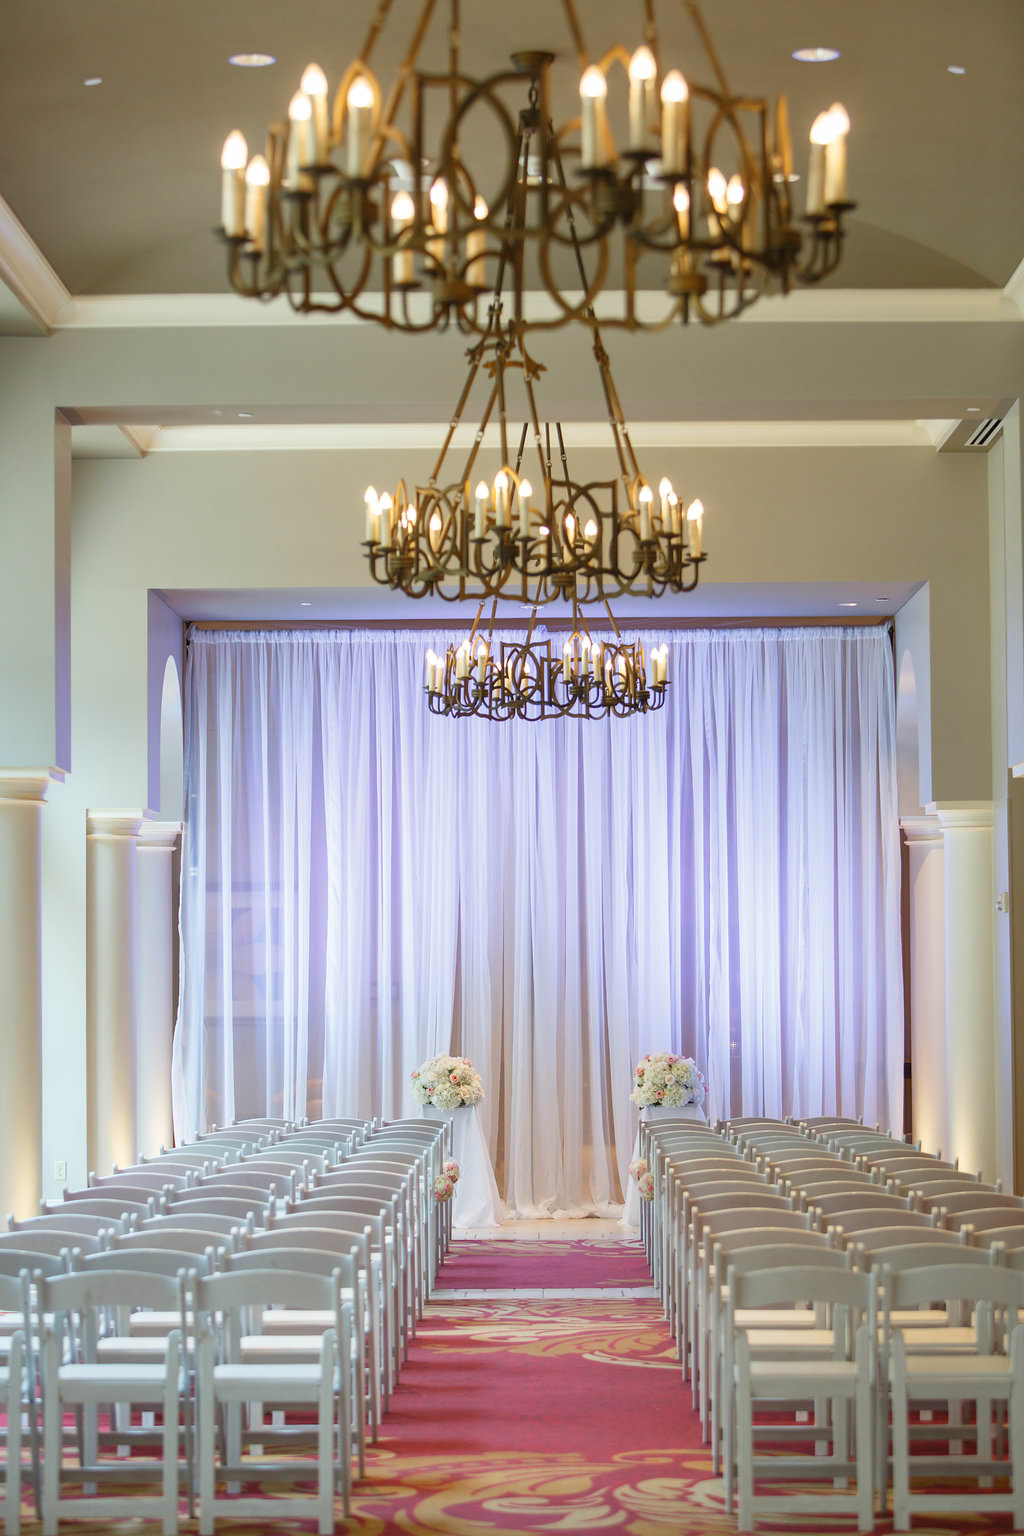 Indoor Hotel Wedding Ceremony with White Folding Chairs, White Florals, and White Draping | Venue The Tampa Renaissance International Hotel